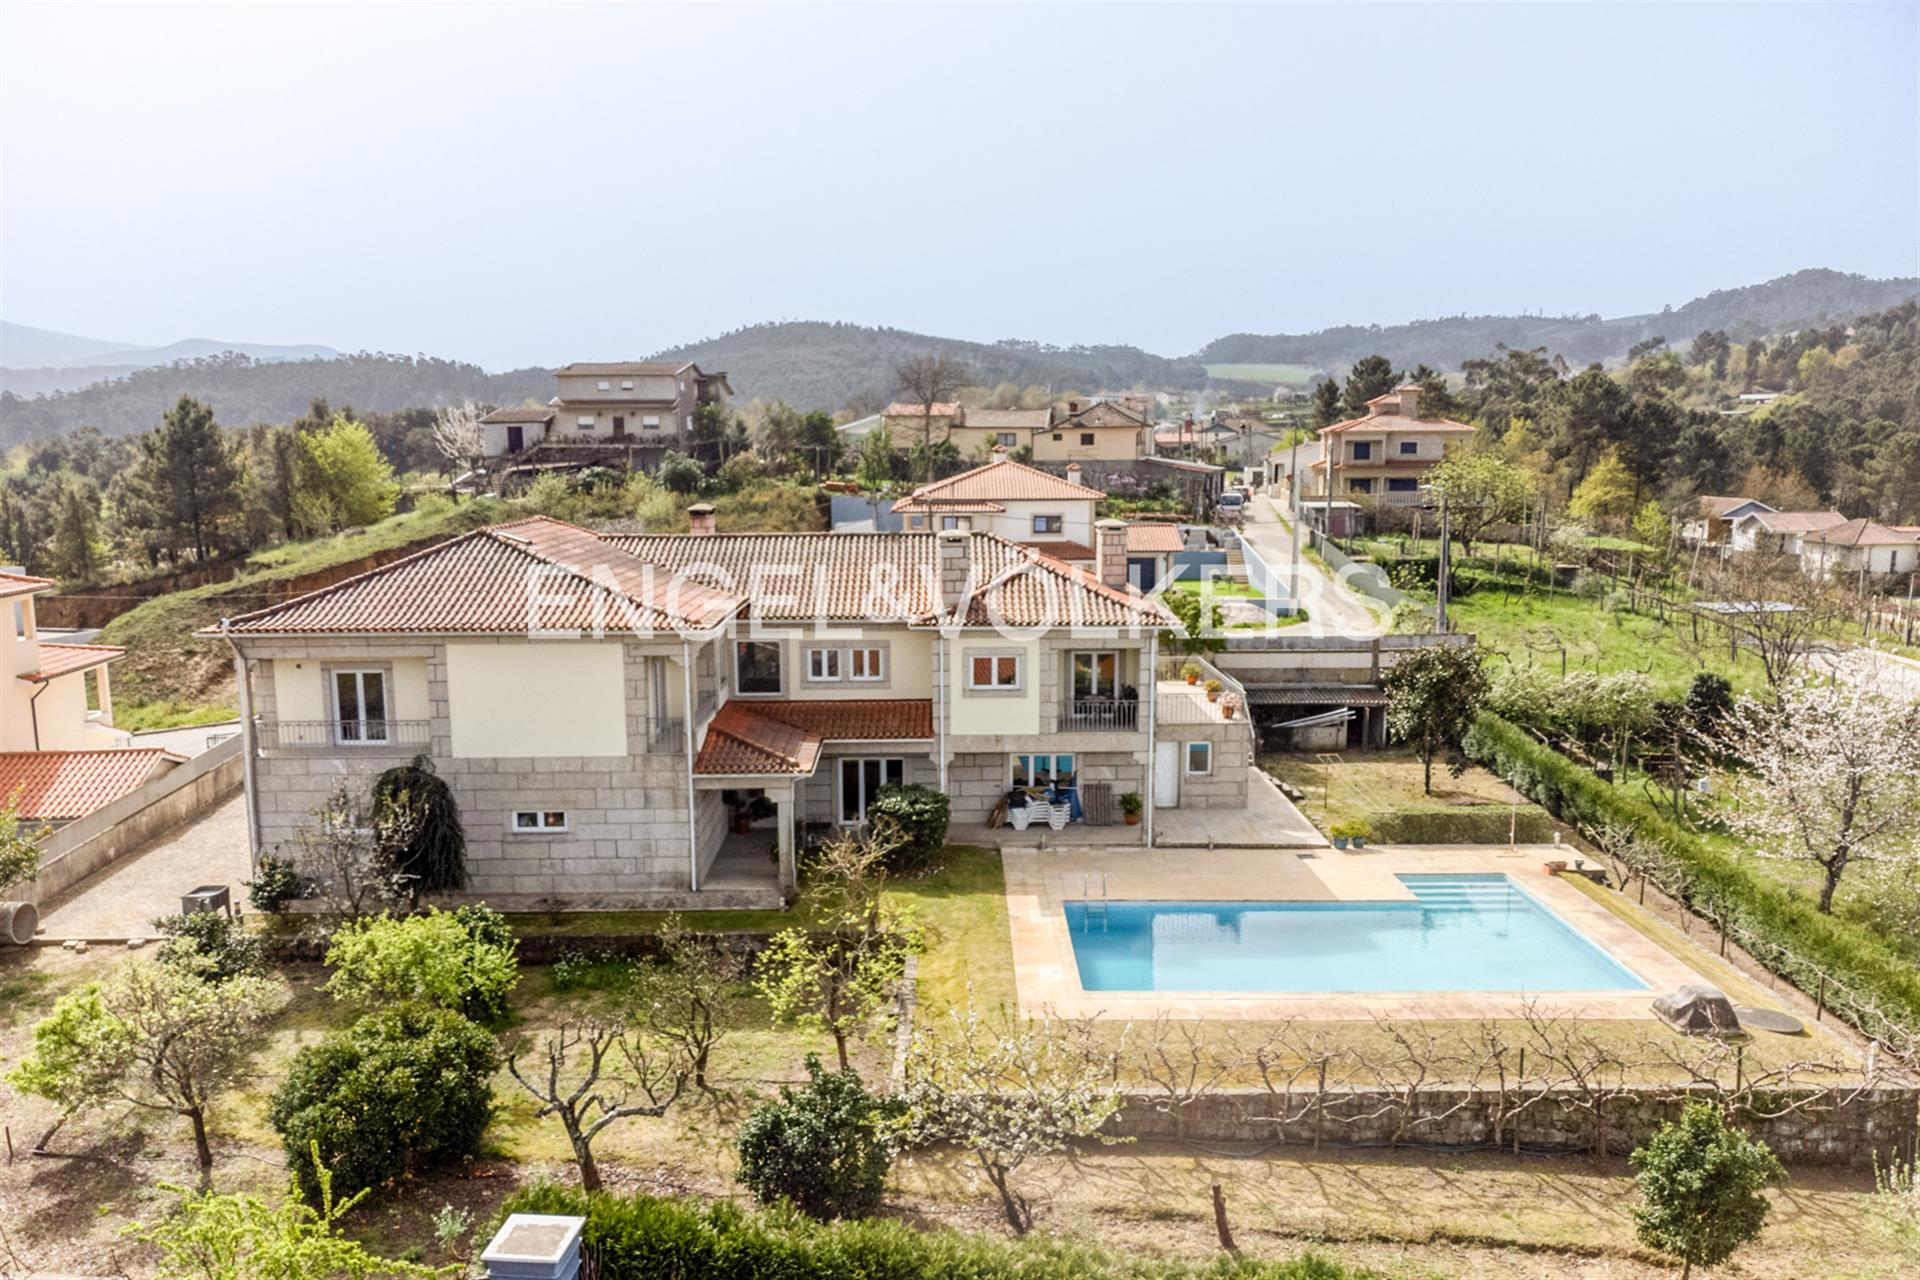 Charming Classic Villa with Swimming Pool and Views of the Freixieiro Valley